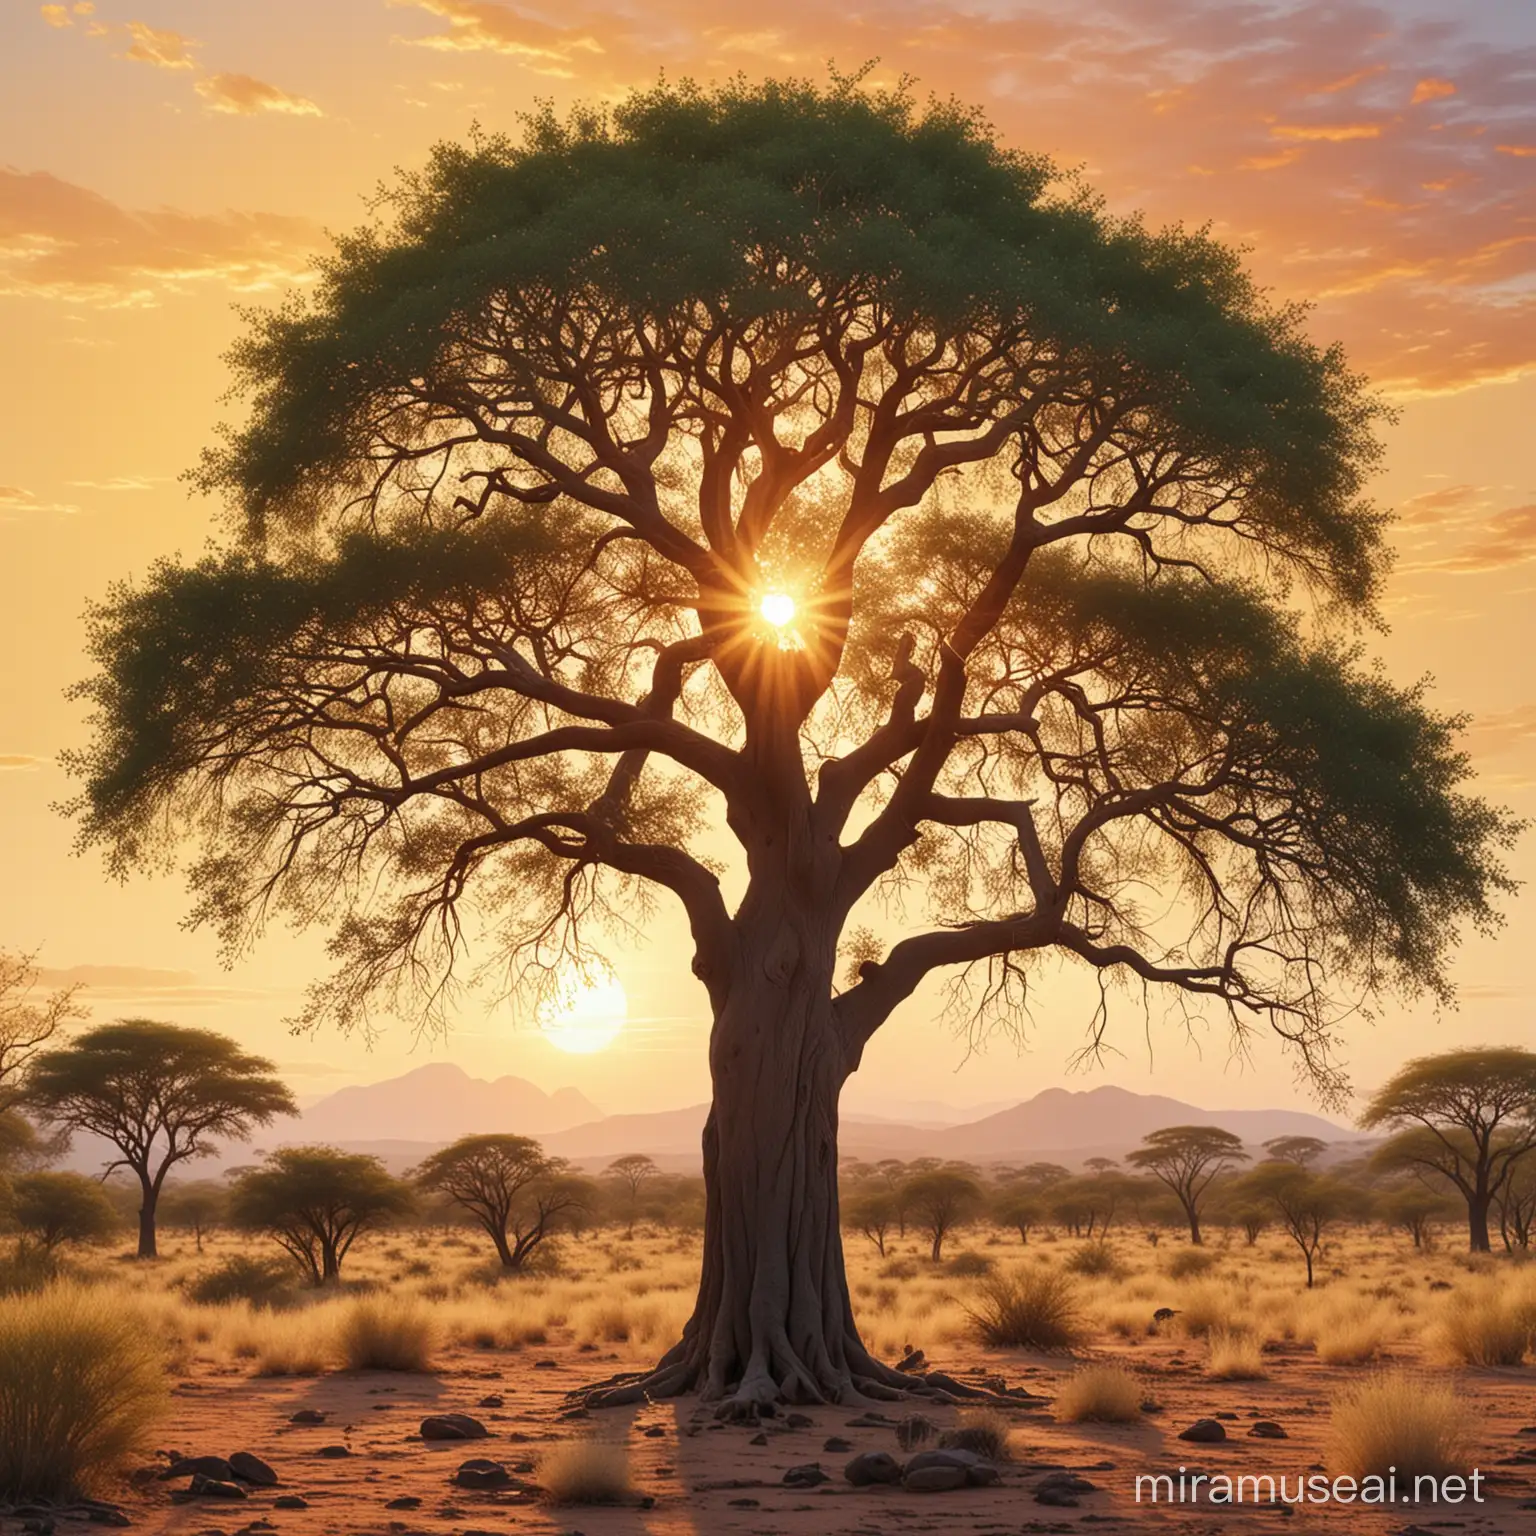 You're an experienced landscape artist who is known for capturing the essence of nature through your vivid paintings. Your task is to create a painting of a real MARULA TREE in its entirety, with the wildlife that surrounds it t Sunrise.